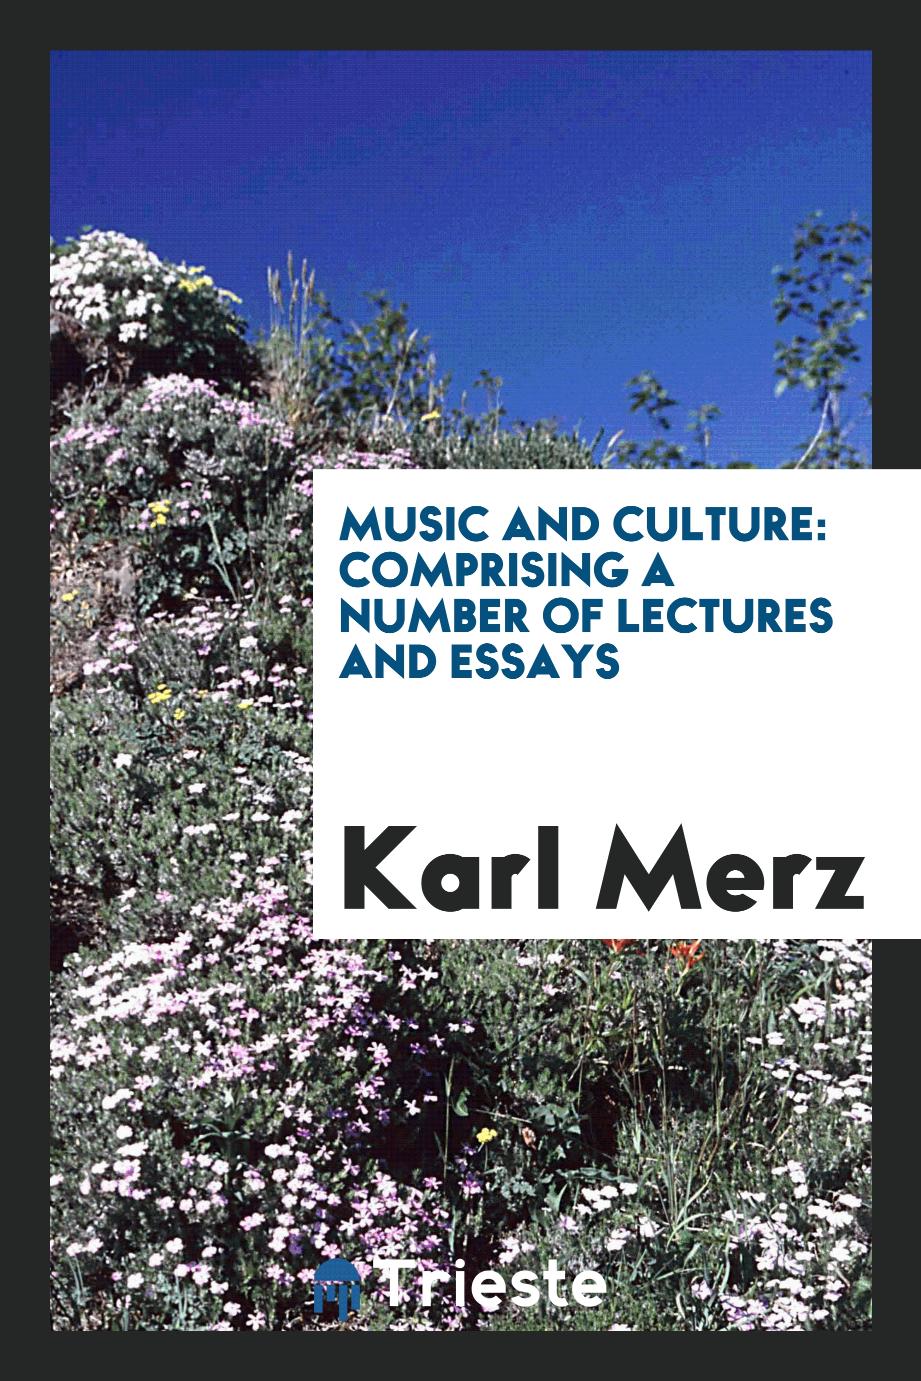 Music and Culture: Comprising a Number of Lectures and Essays